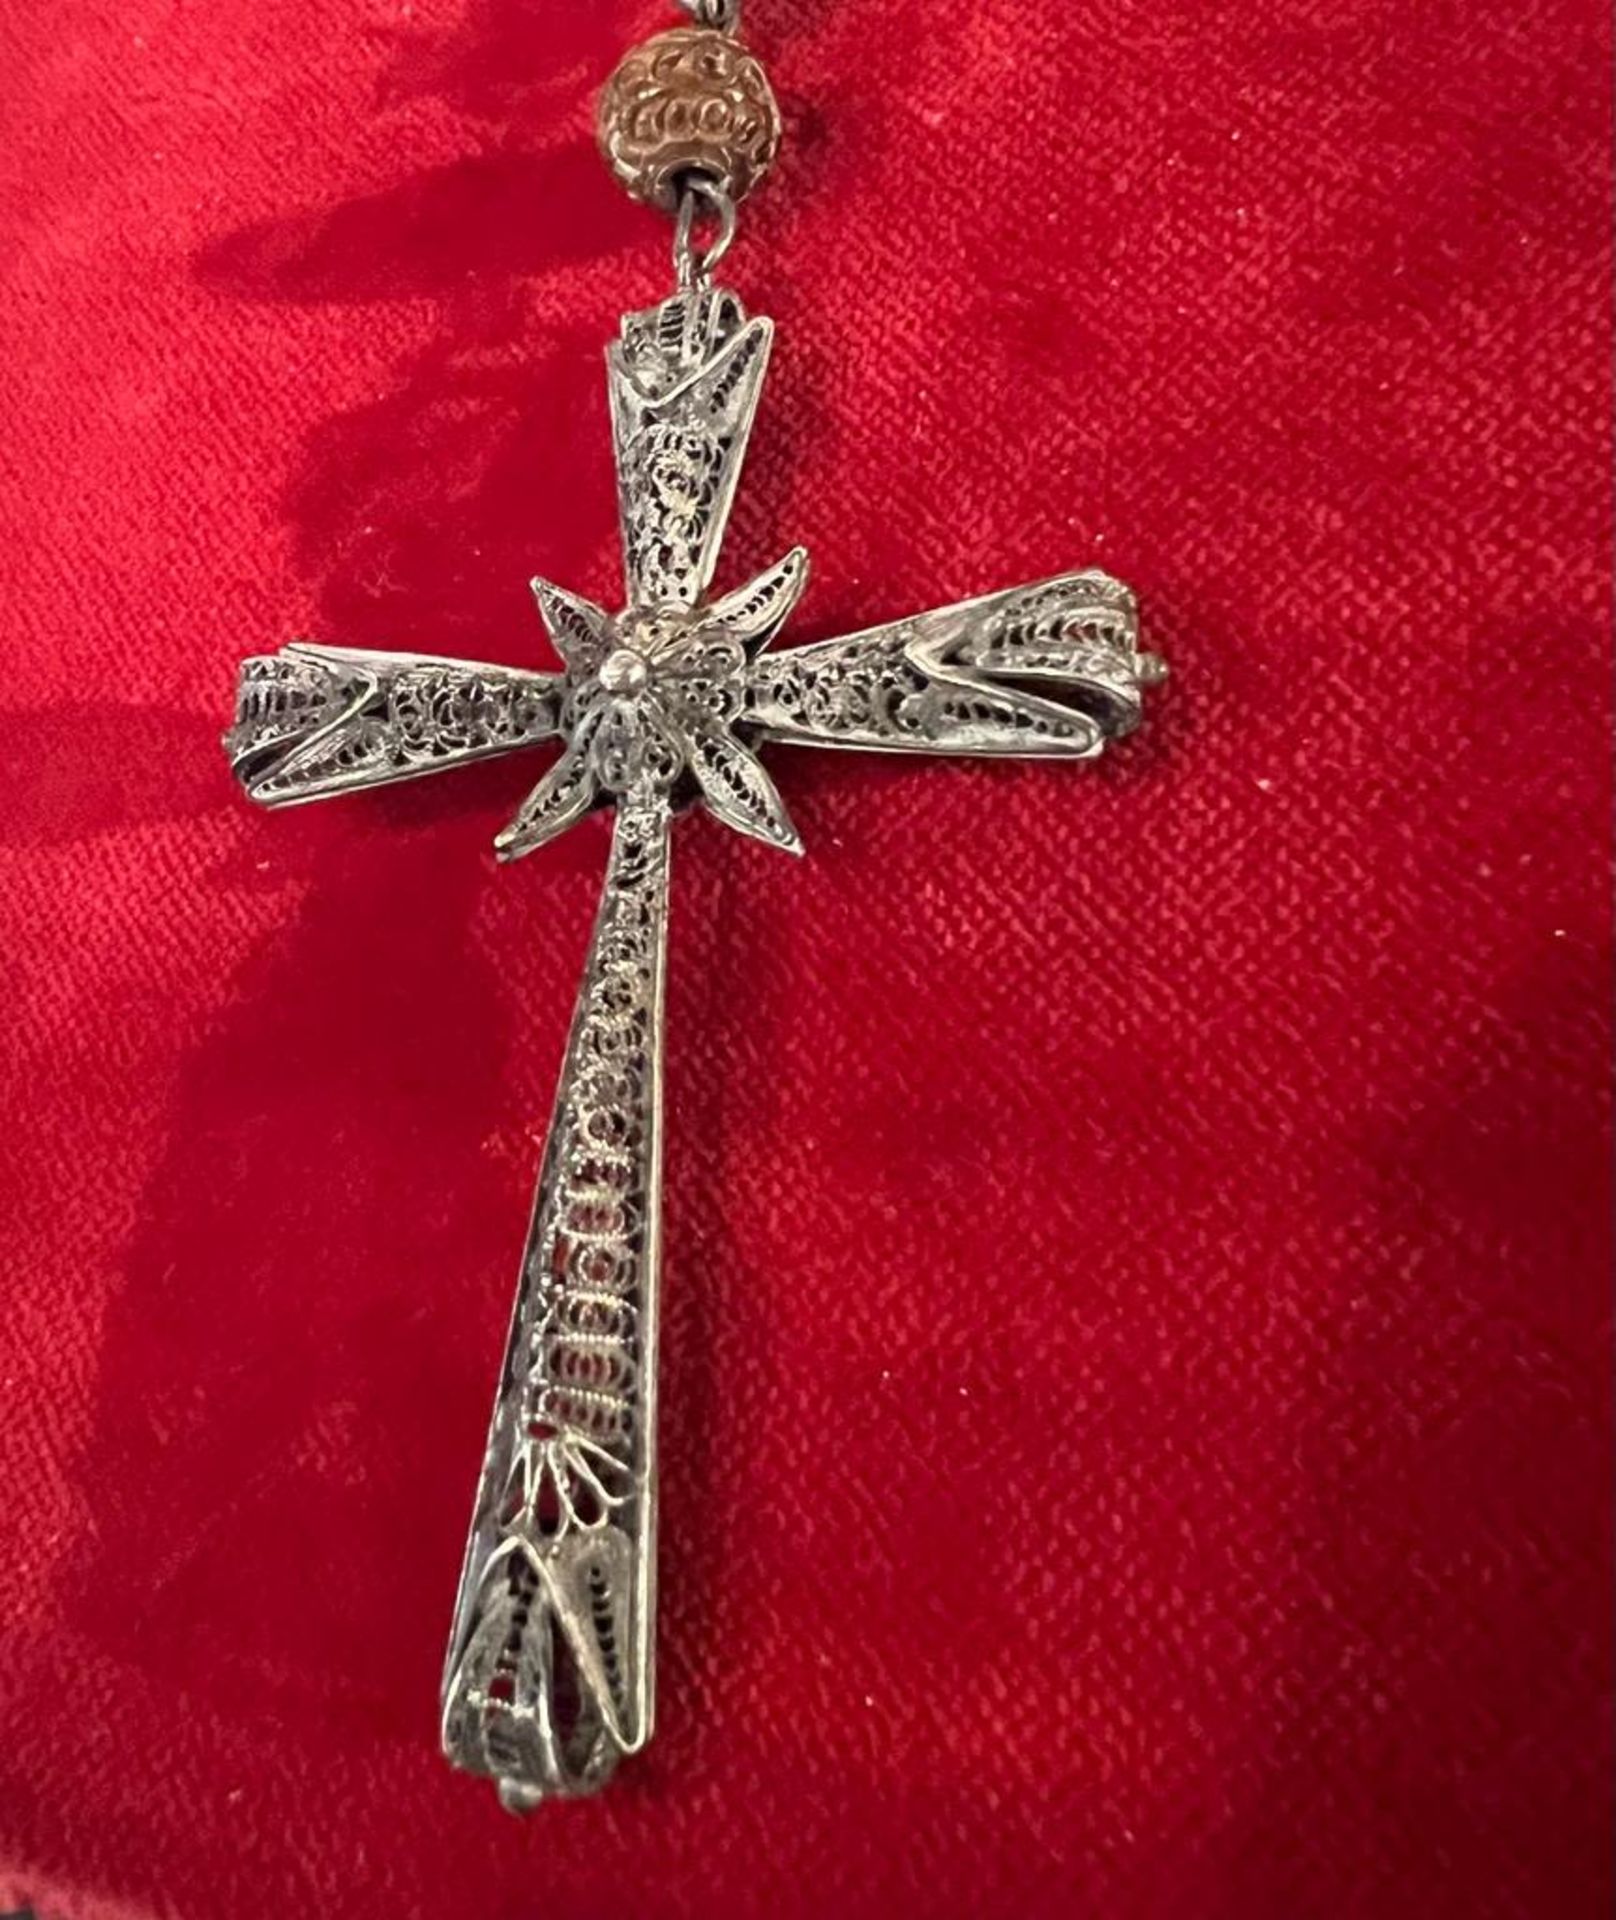 Rare large Portuguese or Spanish colonial Rosary in Coconut beads and fine silver filgree, 18th cent - Image 2 of 6